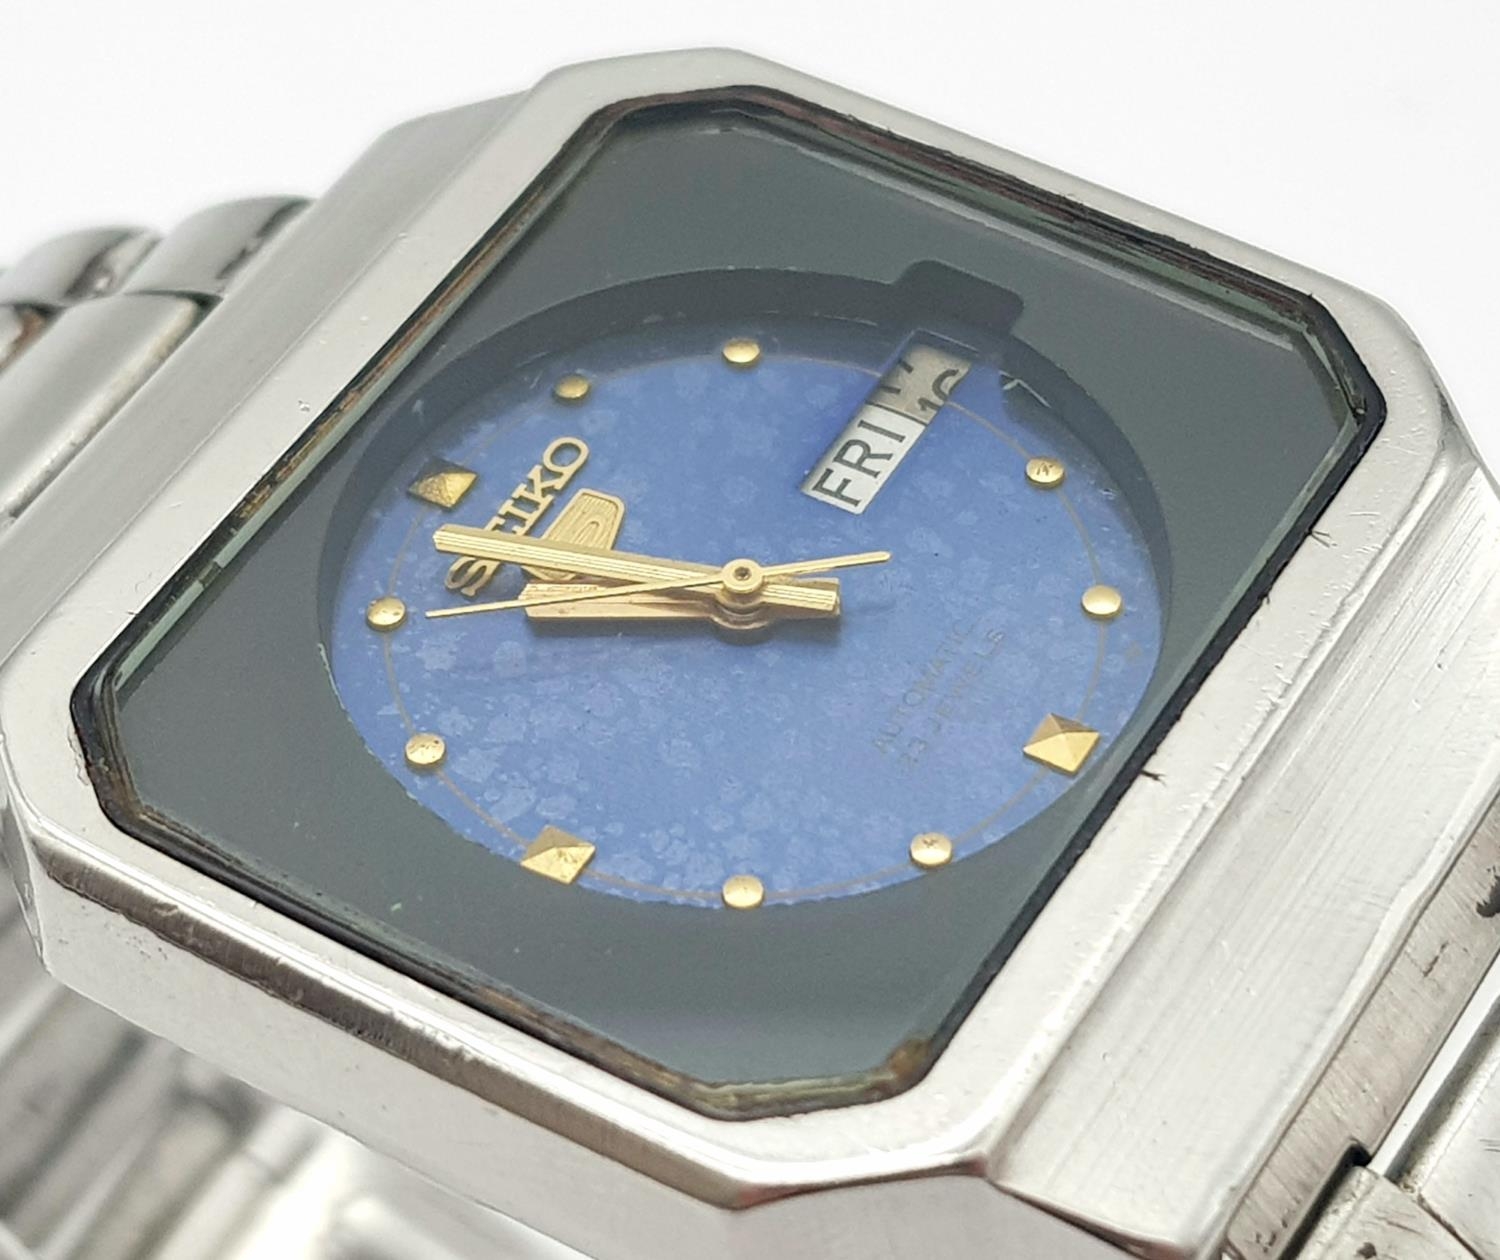 A Vintage Seiko 5 Automatic TV Screen Gents Watch. Stainless steel bracelet and case - 36mm. Blue - Image 2 of 5